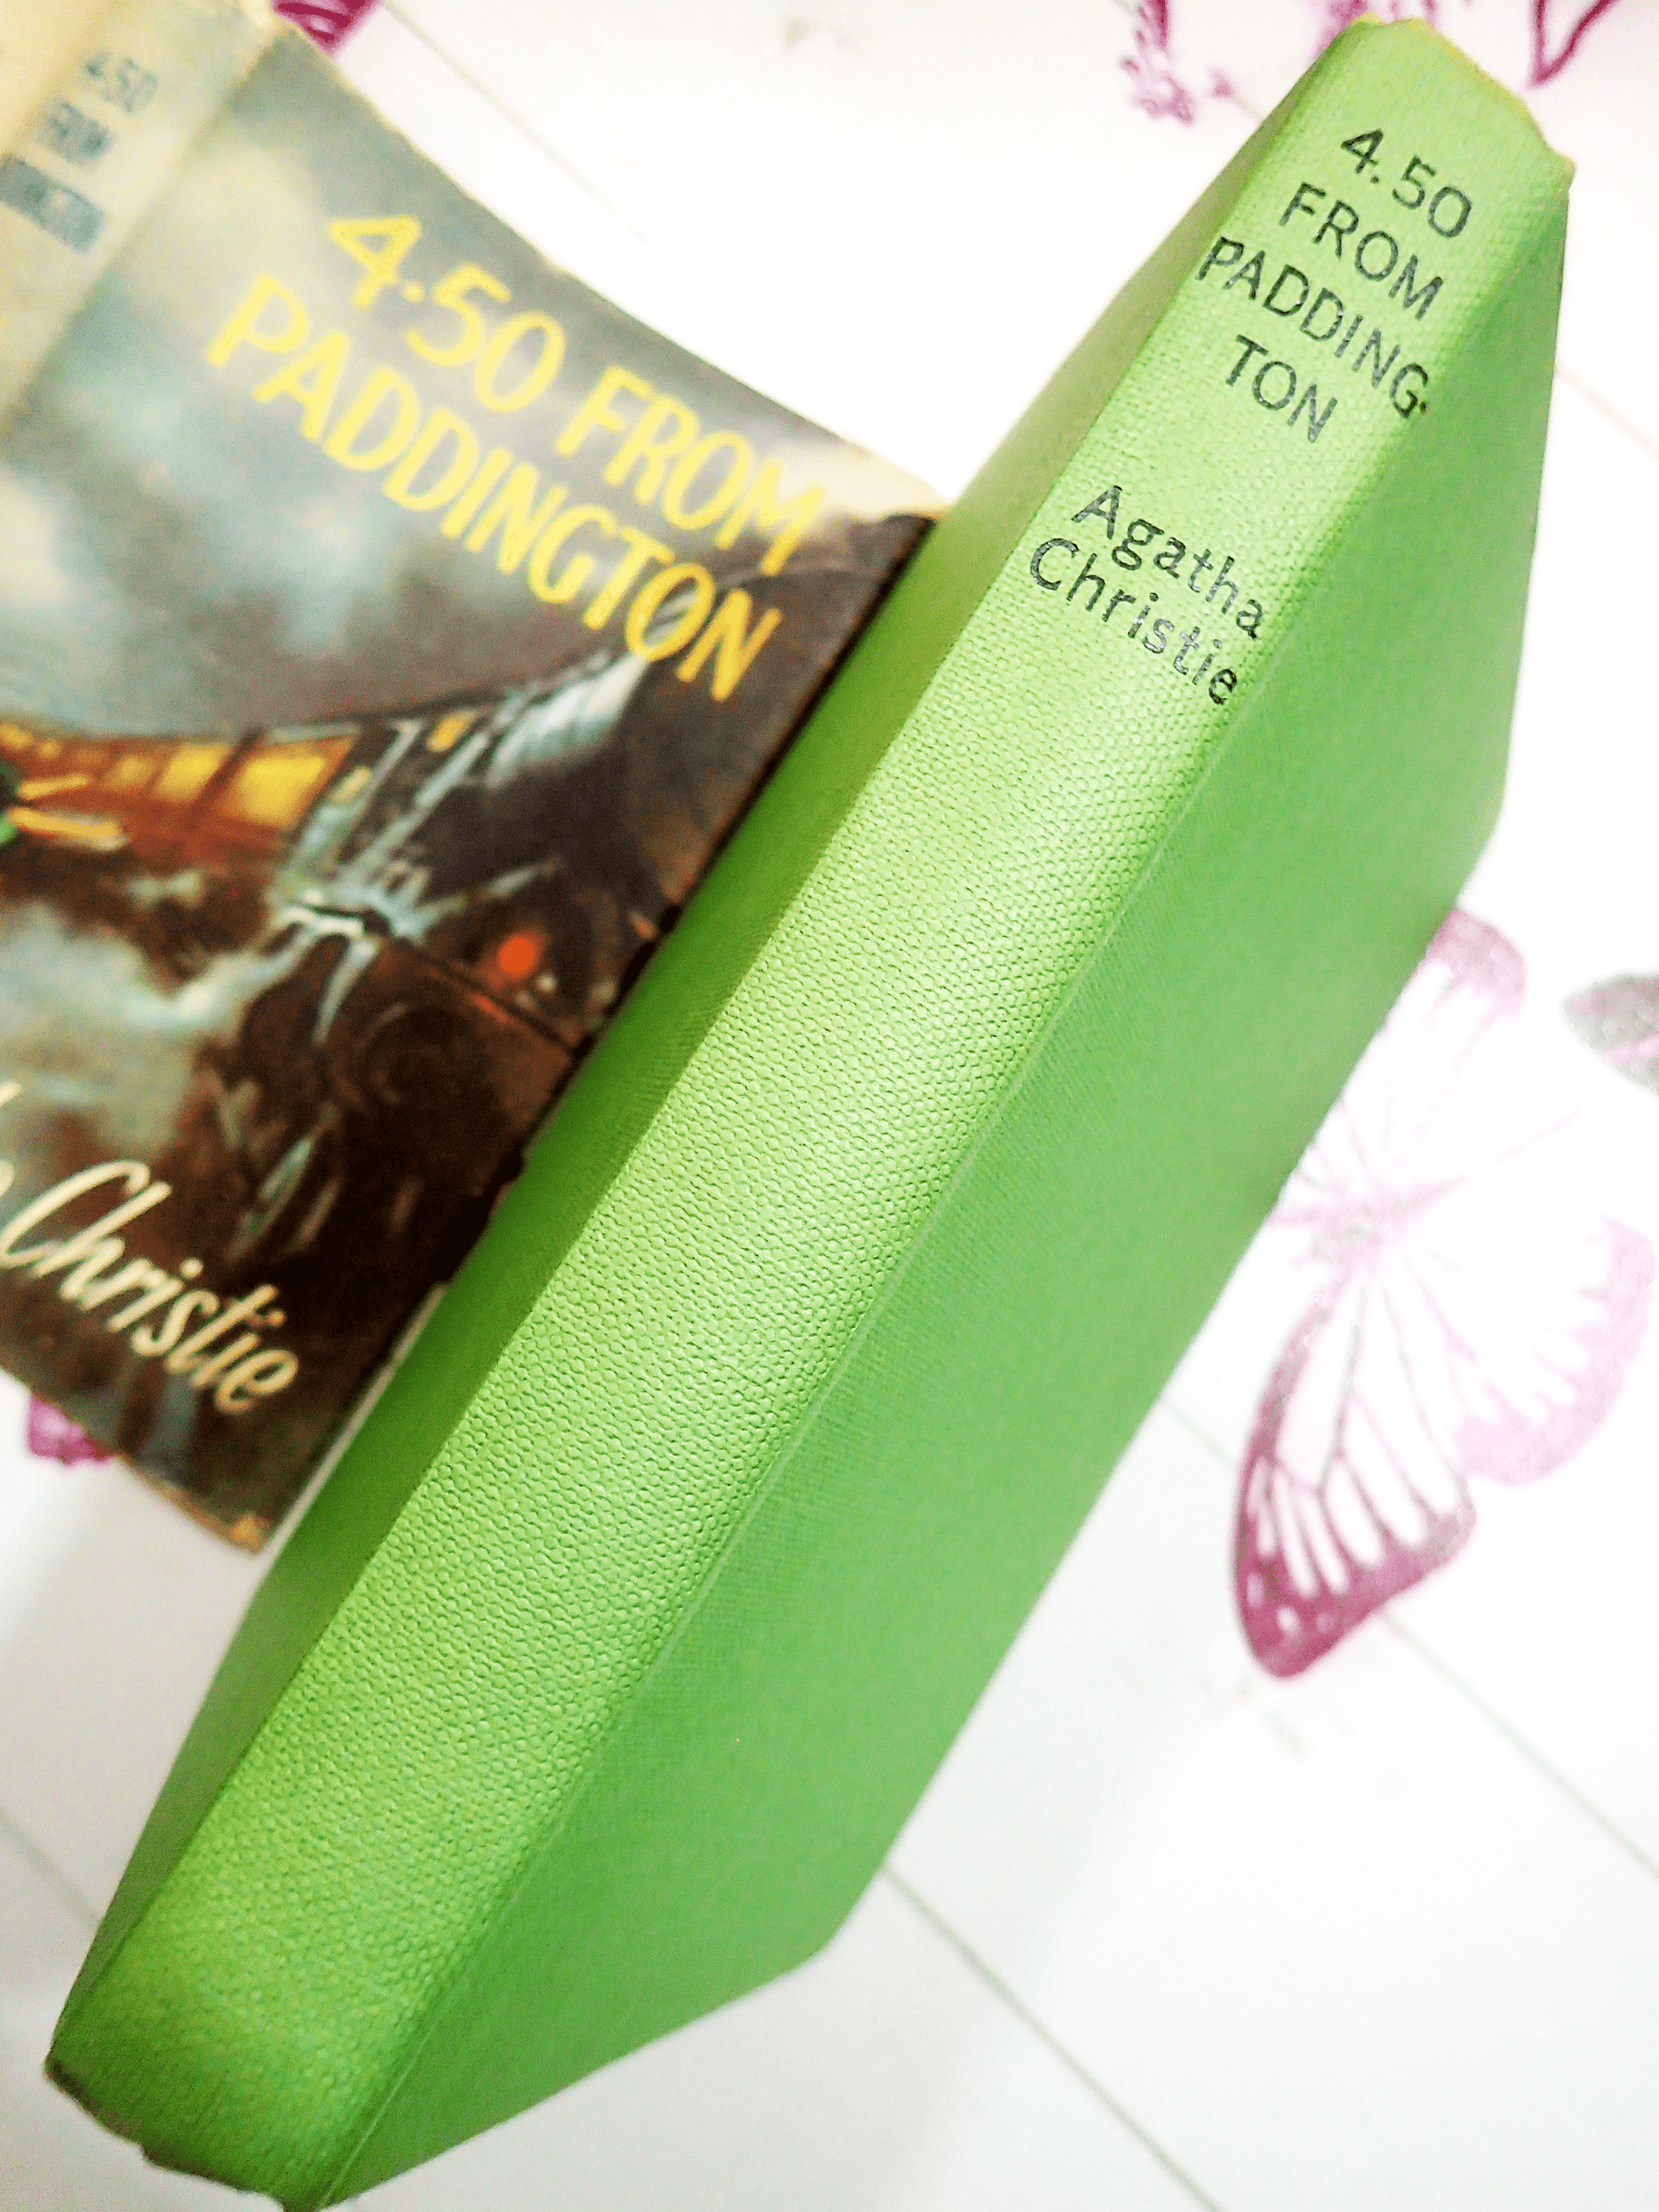 Green cloth covered boards of Agatha Christie 4.50 from Paddington Classic Vintage Crime Fiction book showing spine with black titles against the pictorial dustjacket. 